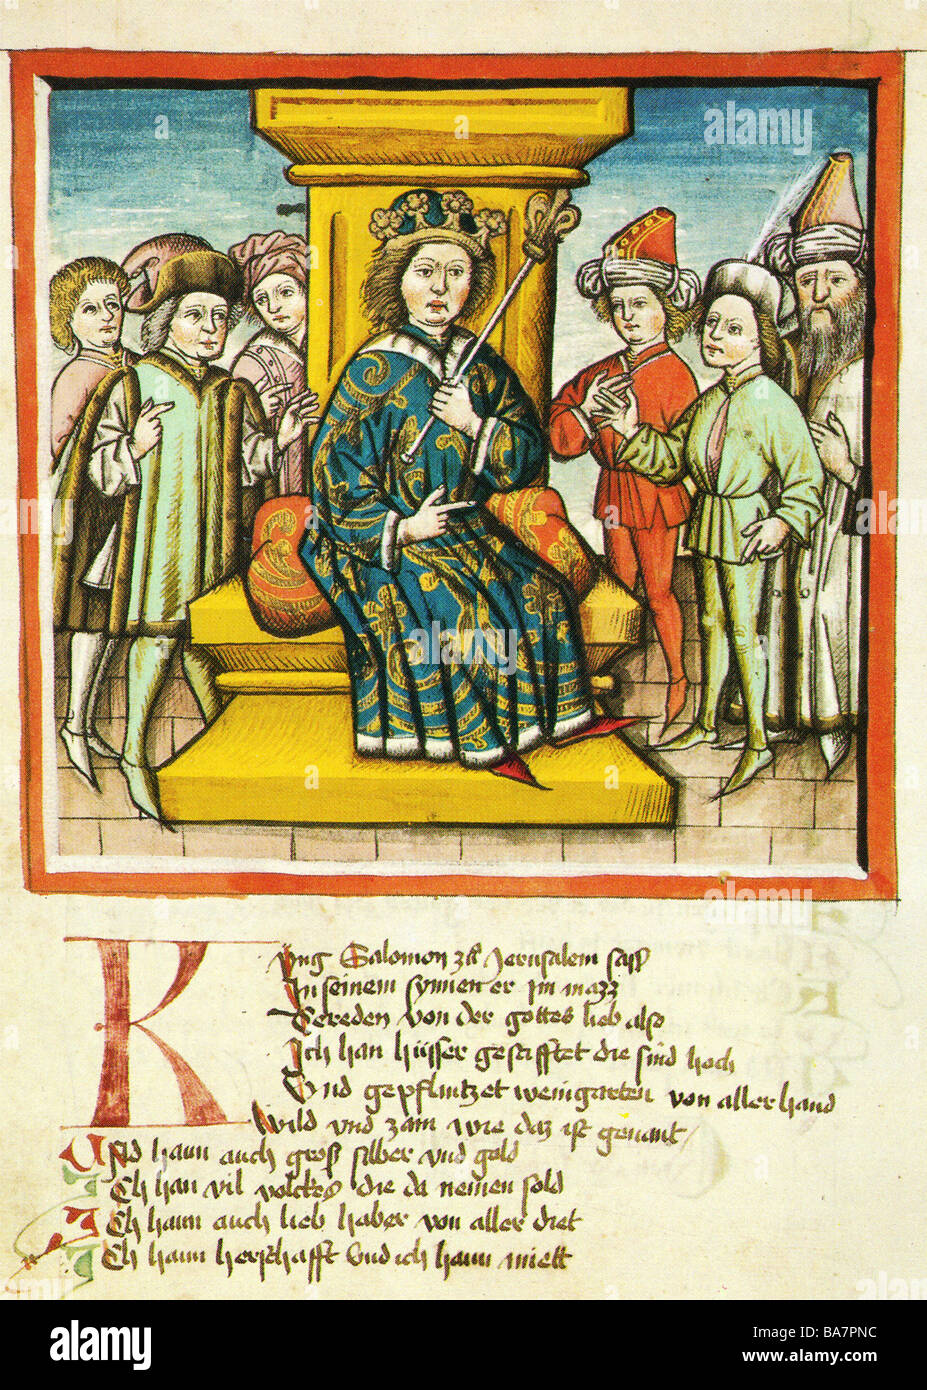 Solomon, King of Israel circa 971 - 931 BC, mediaeval miniature from 'Die Blumen der Tugend' (The Flowers of Virtue) by Hans Vintler, 15th century, Gotha, Germany, Research and State Library, Stock Photo